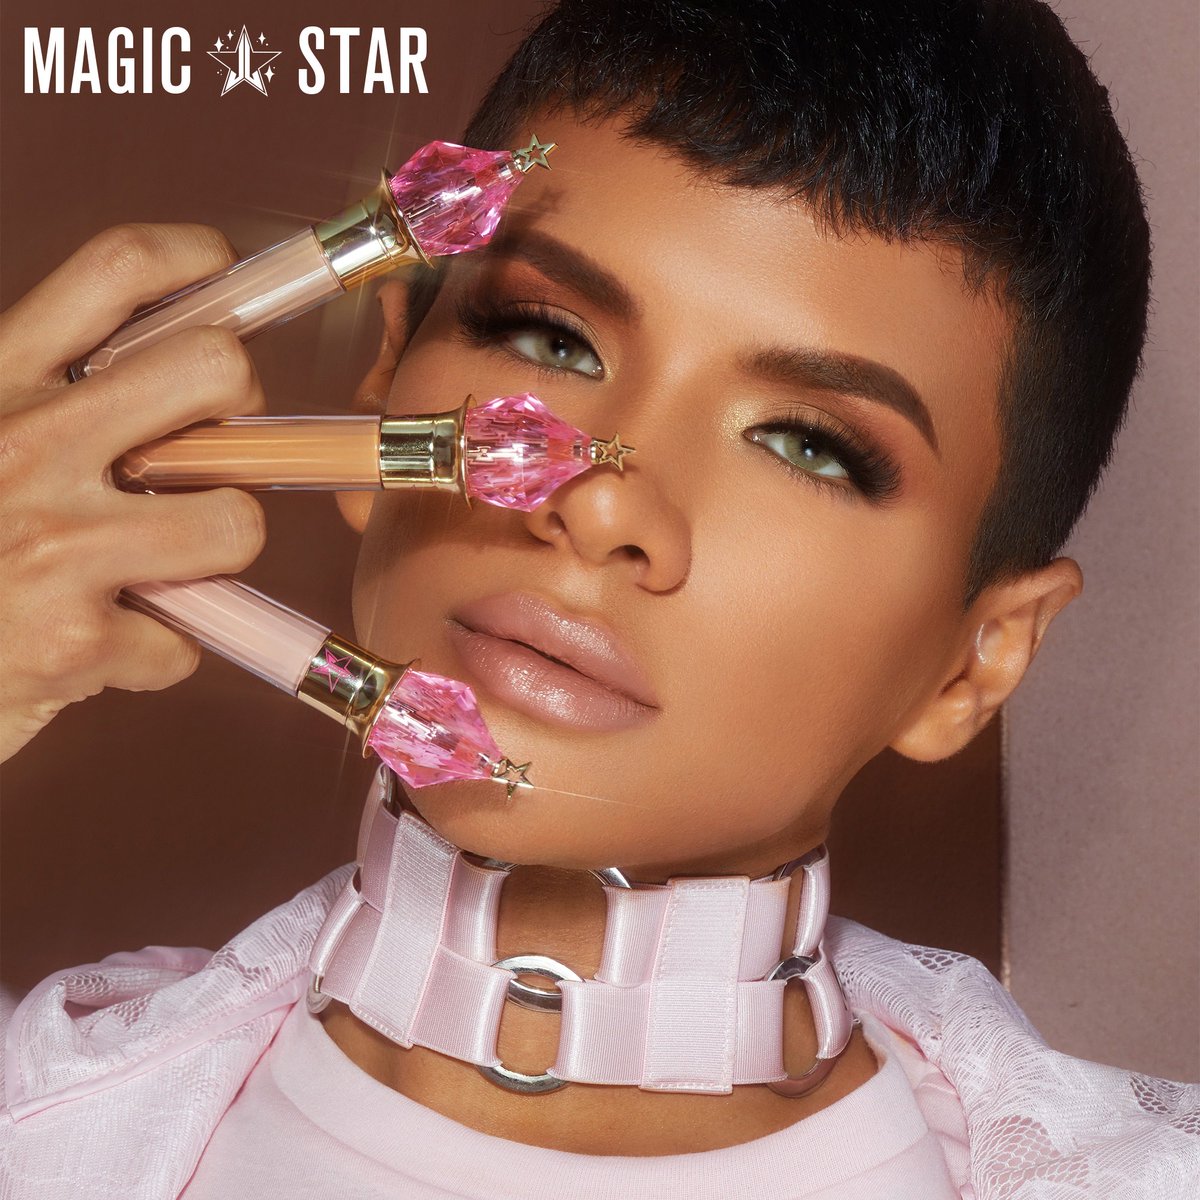 Jeffree on Twitter: "My concealer comes in 30 shades 🔥 Retail: $22.00 ⭐️ Full coverage, hydrating, creamy.. Launching APR. 19TH!!!! Feat. the stunning @gabrielzamora https://t.co/BB6lVrbtaW" / X